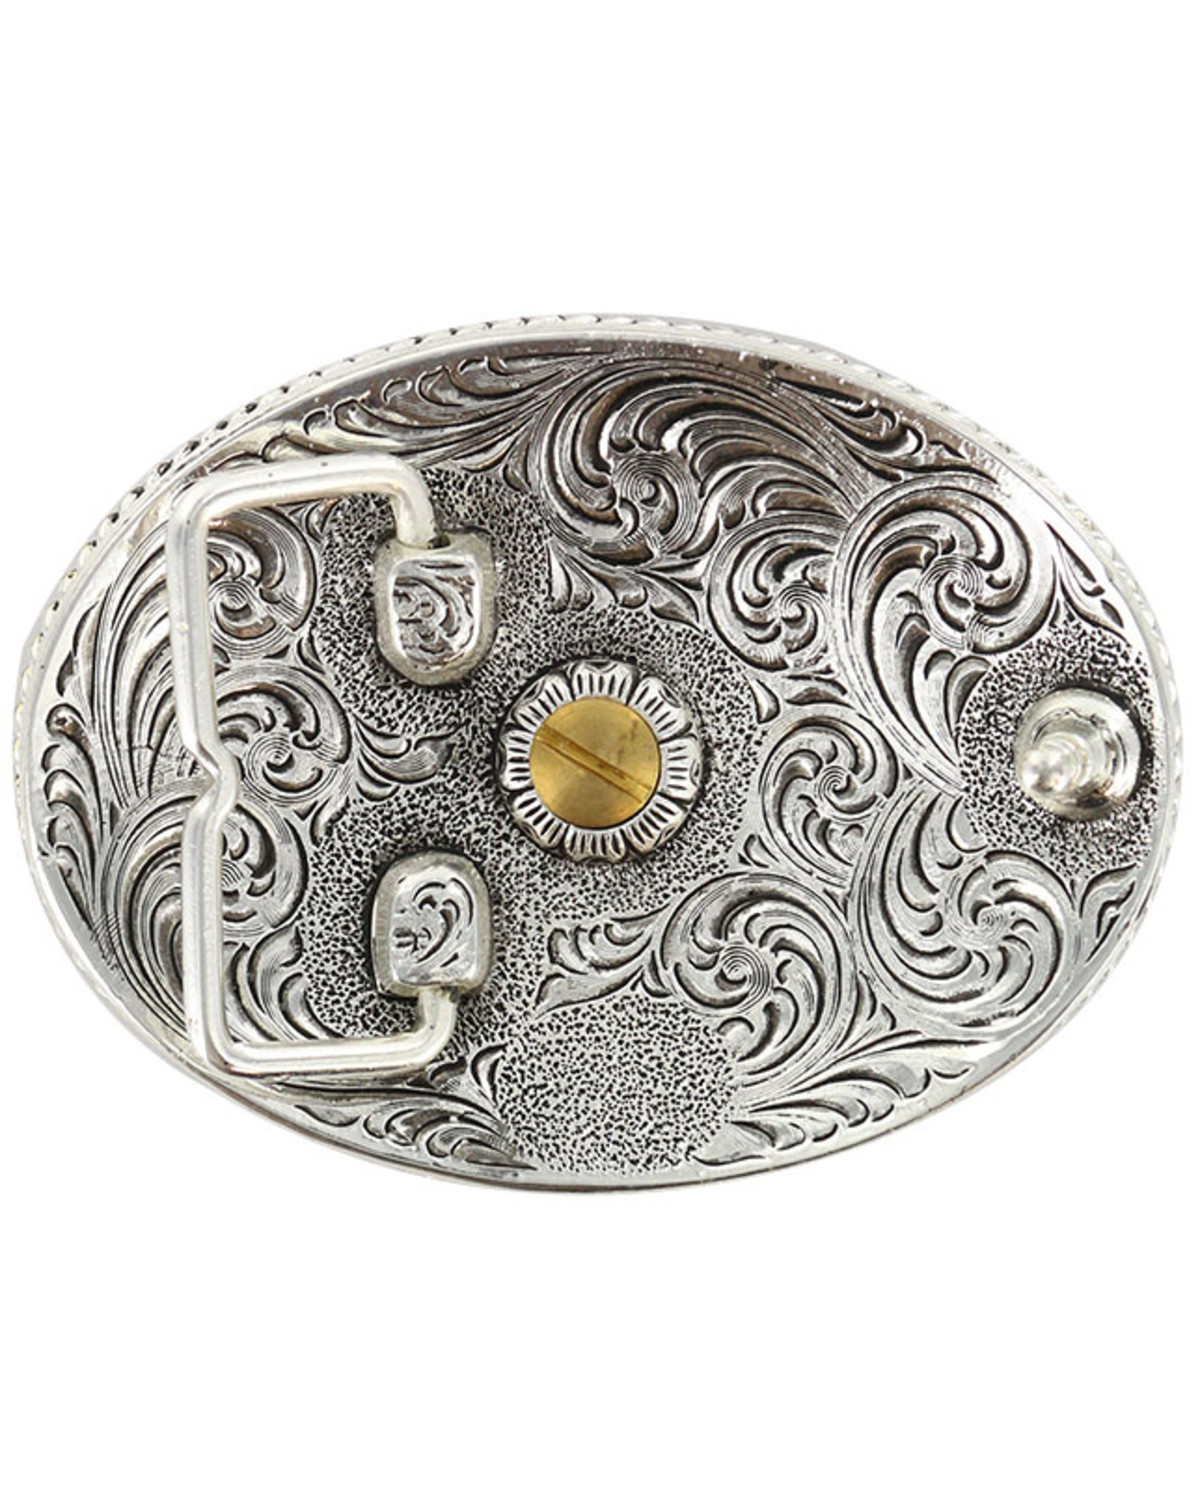 Cody James Men's Tennessee Belt Buckle - Country Outfitter